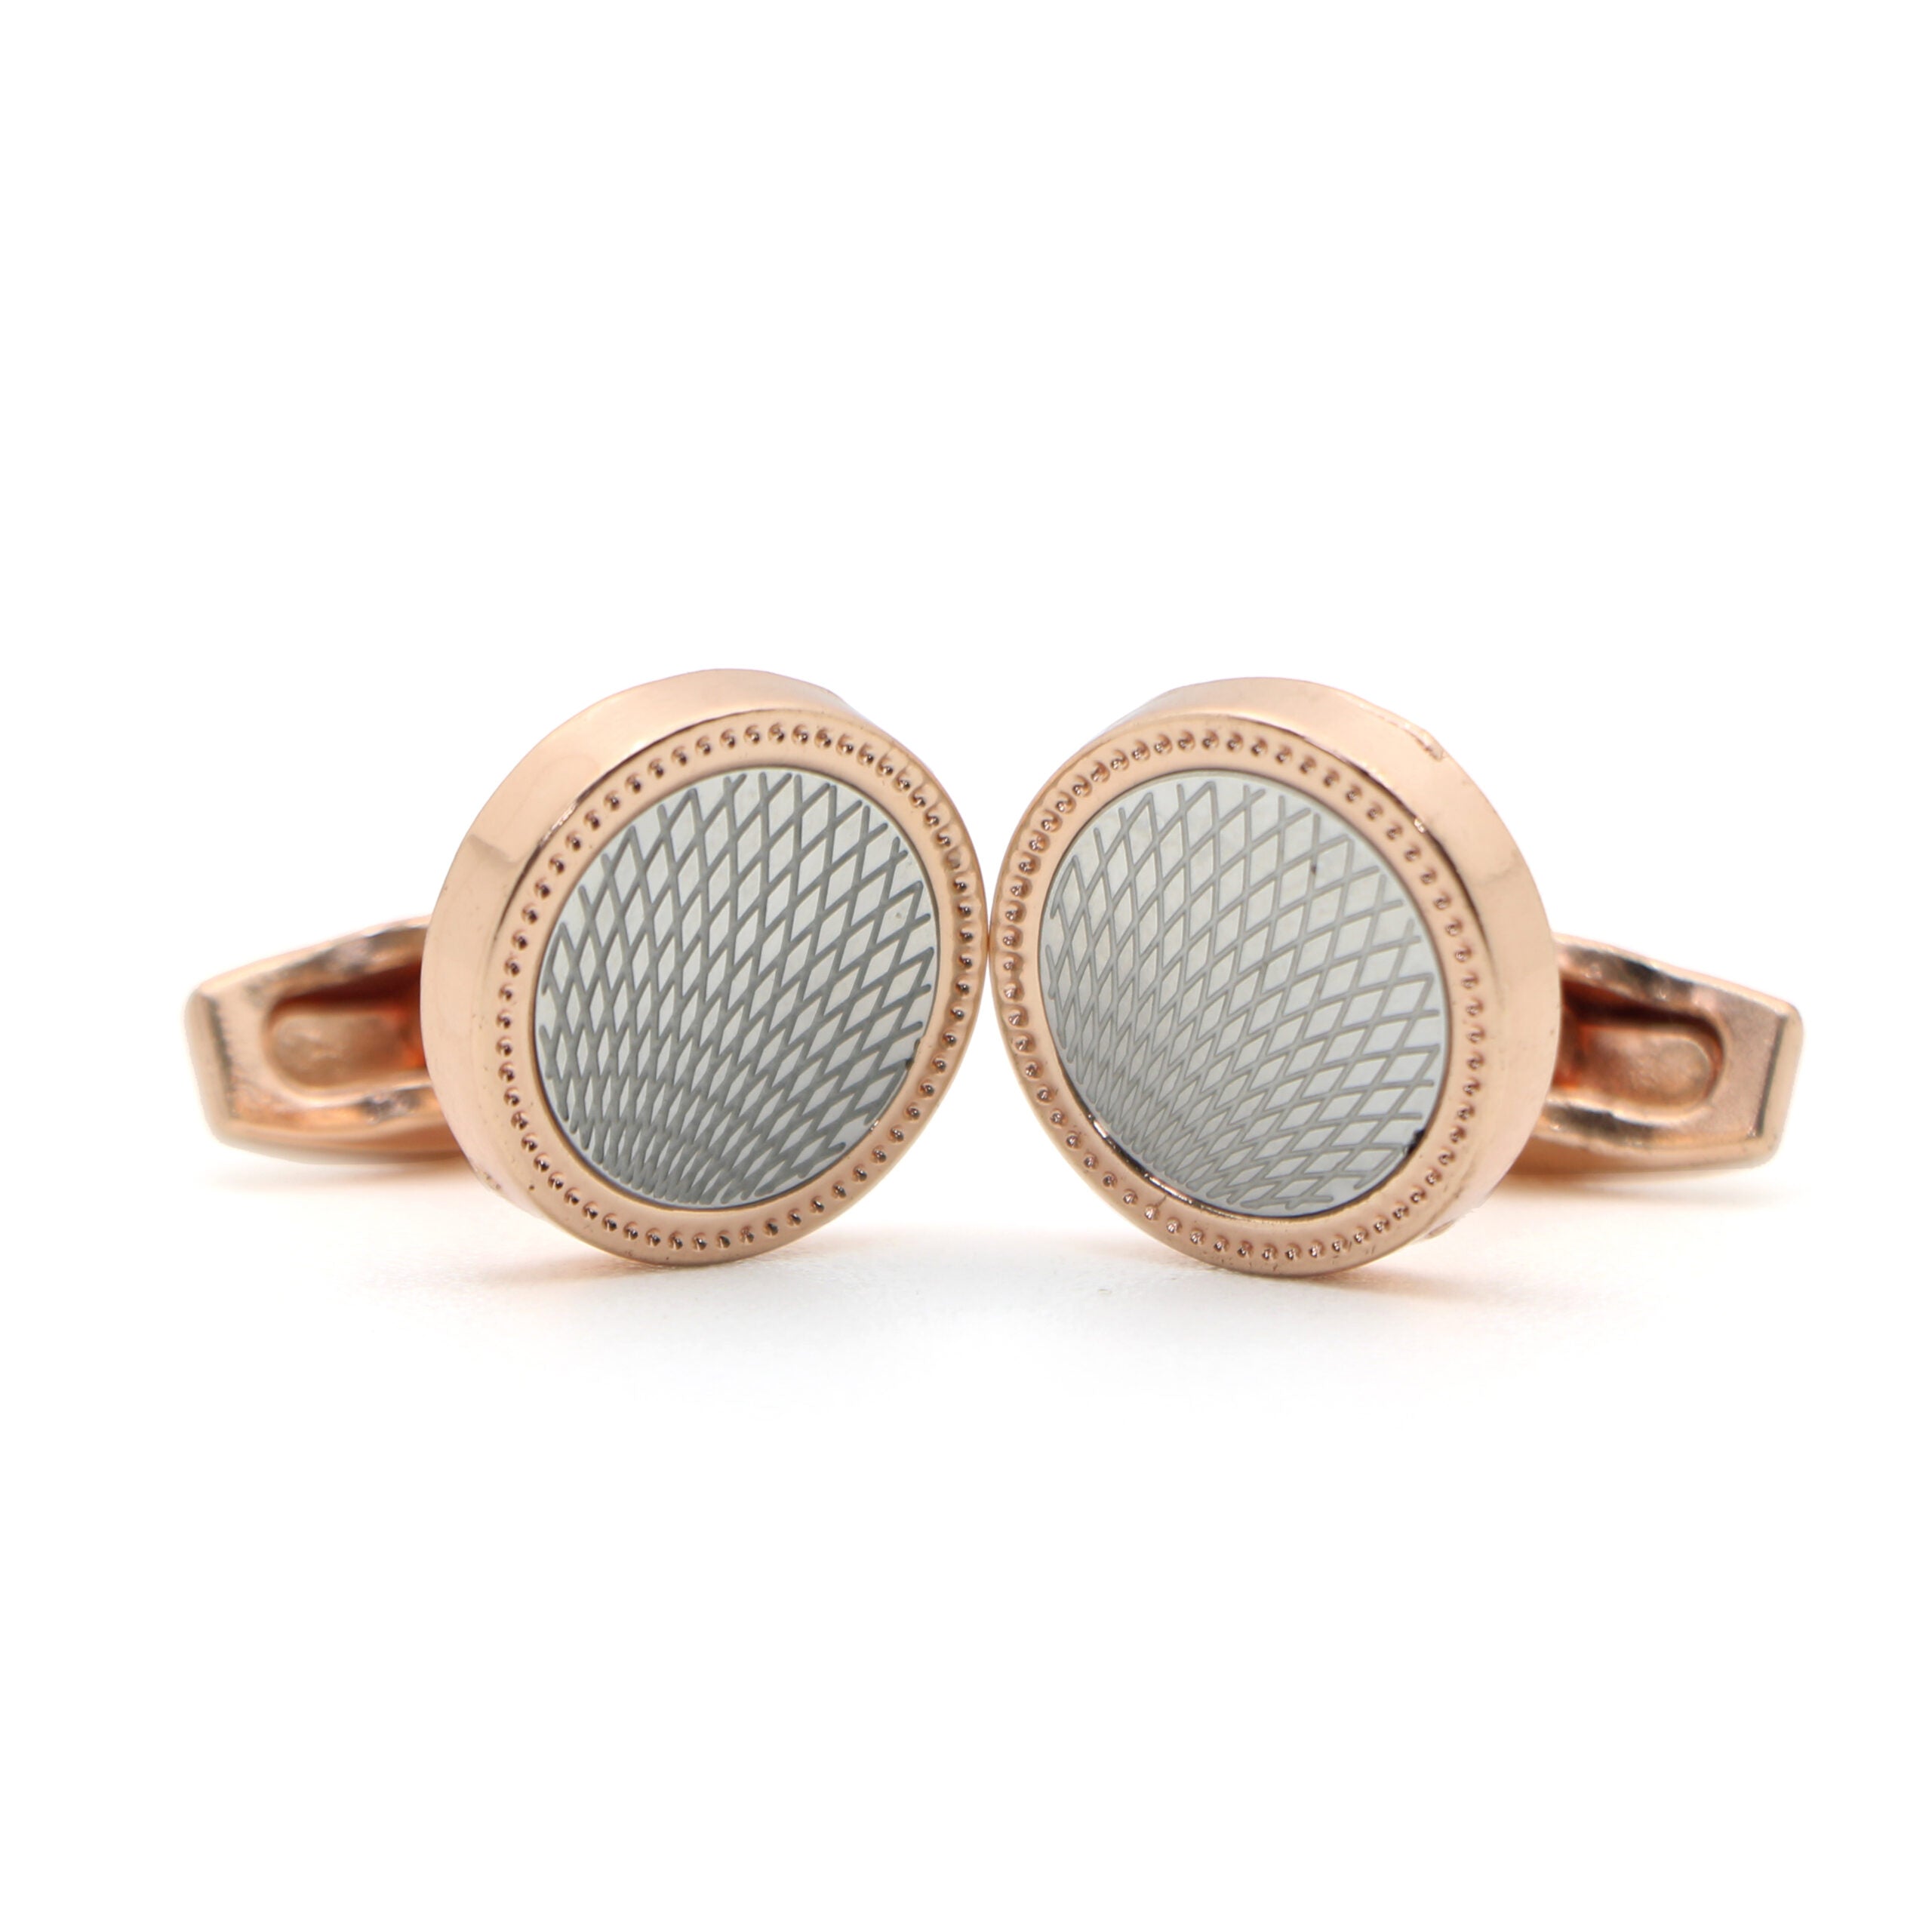 Vintage Cufflinks for Men's Shirt with a Gift Box - CU-1008